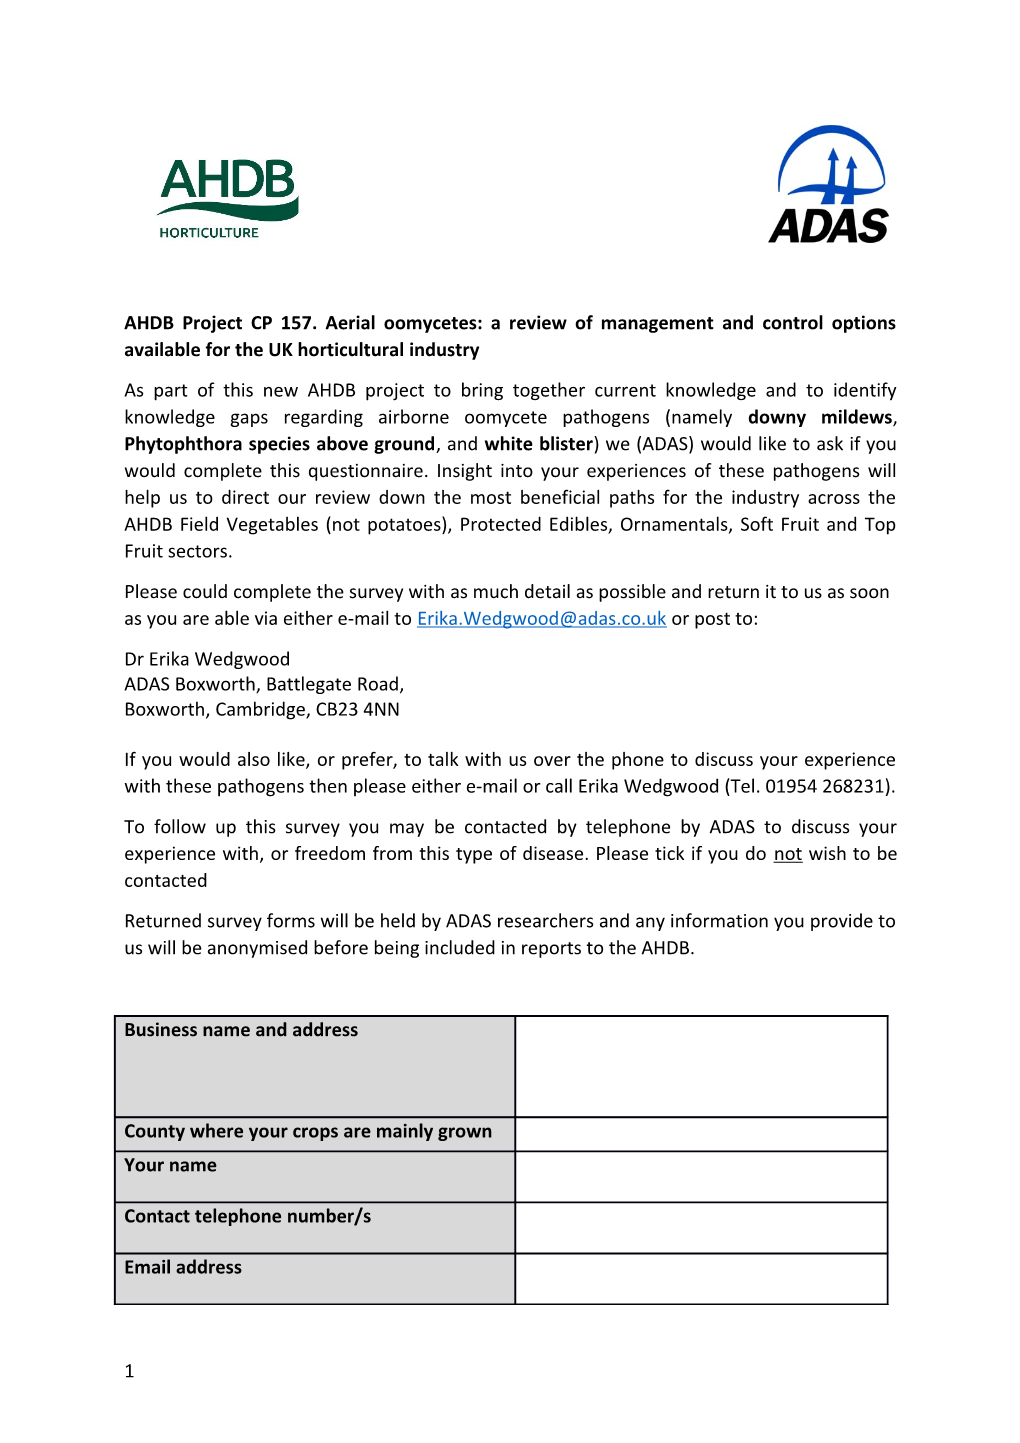 AHDB Project CP 157. Aerial Oomycetes: a Review of Management and Control Options Available